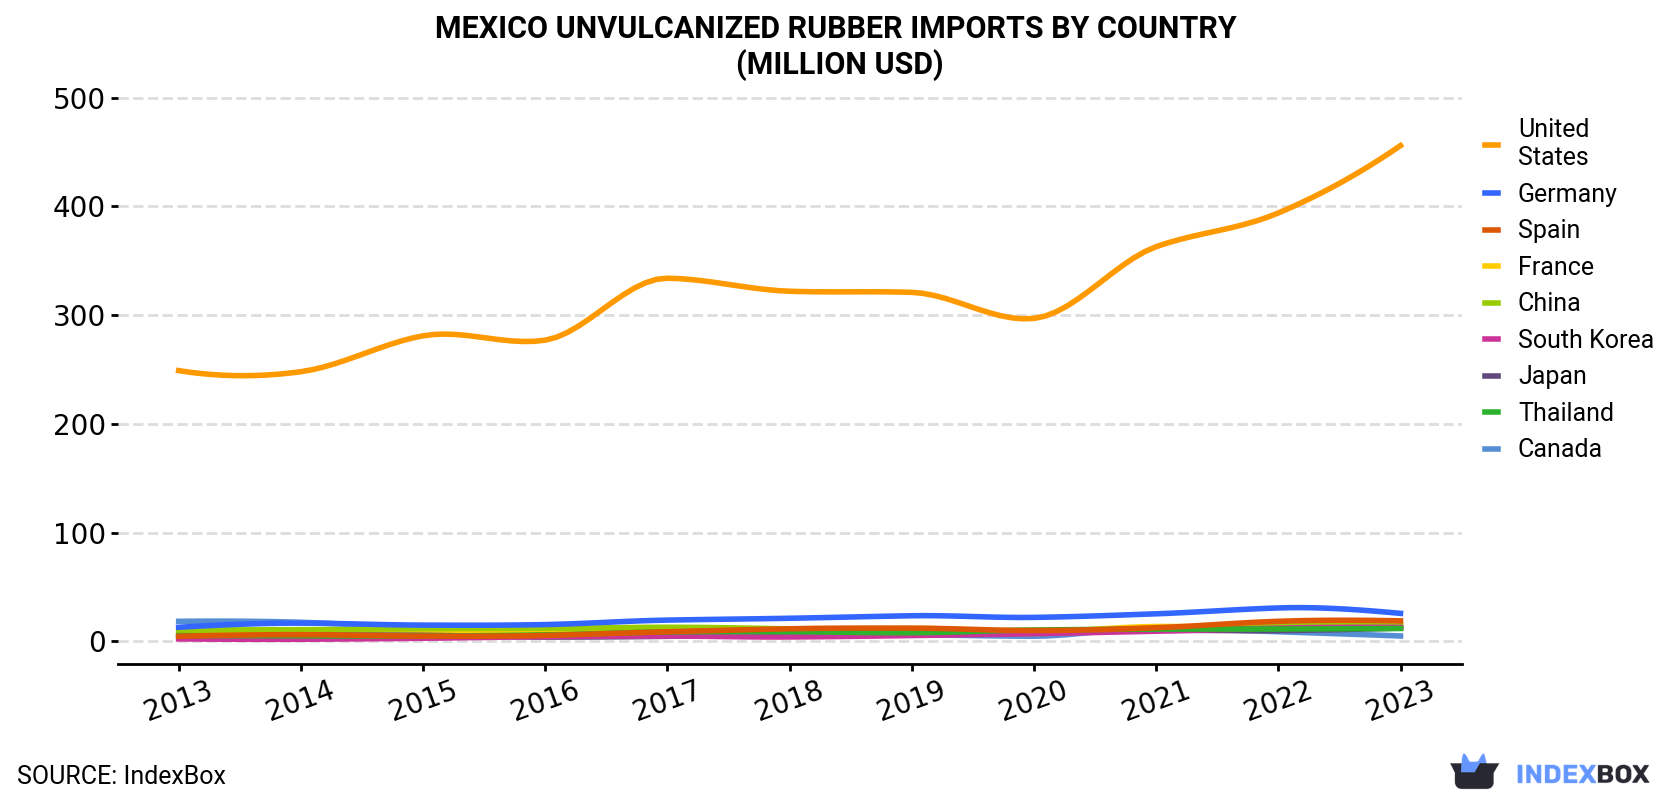 Mexico Unvulcanized Rubber Imports By Country (Million USD)